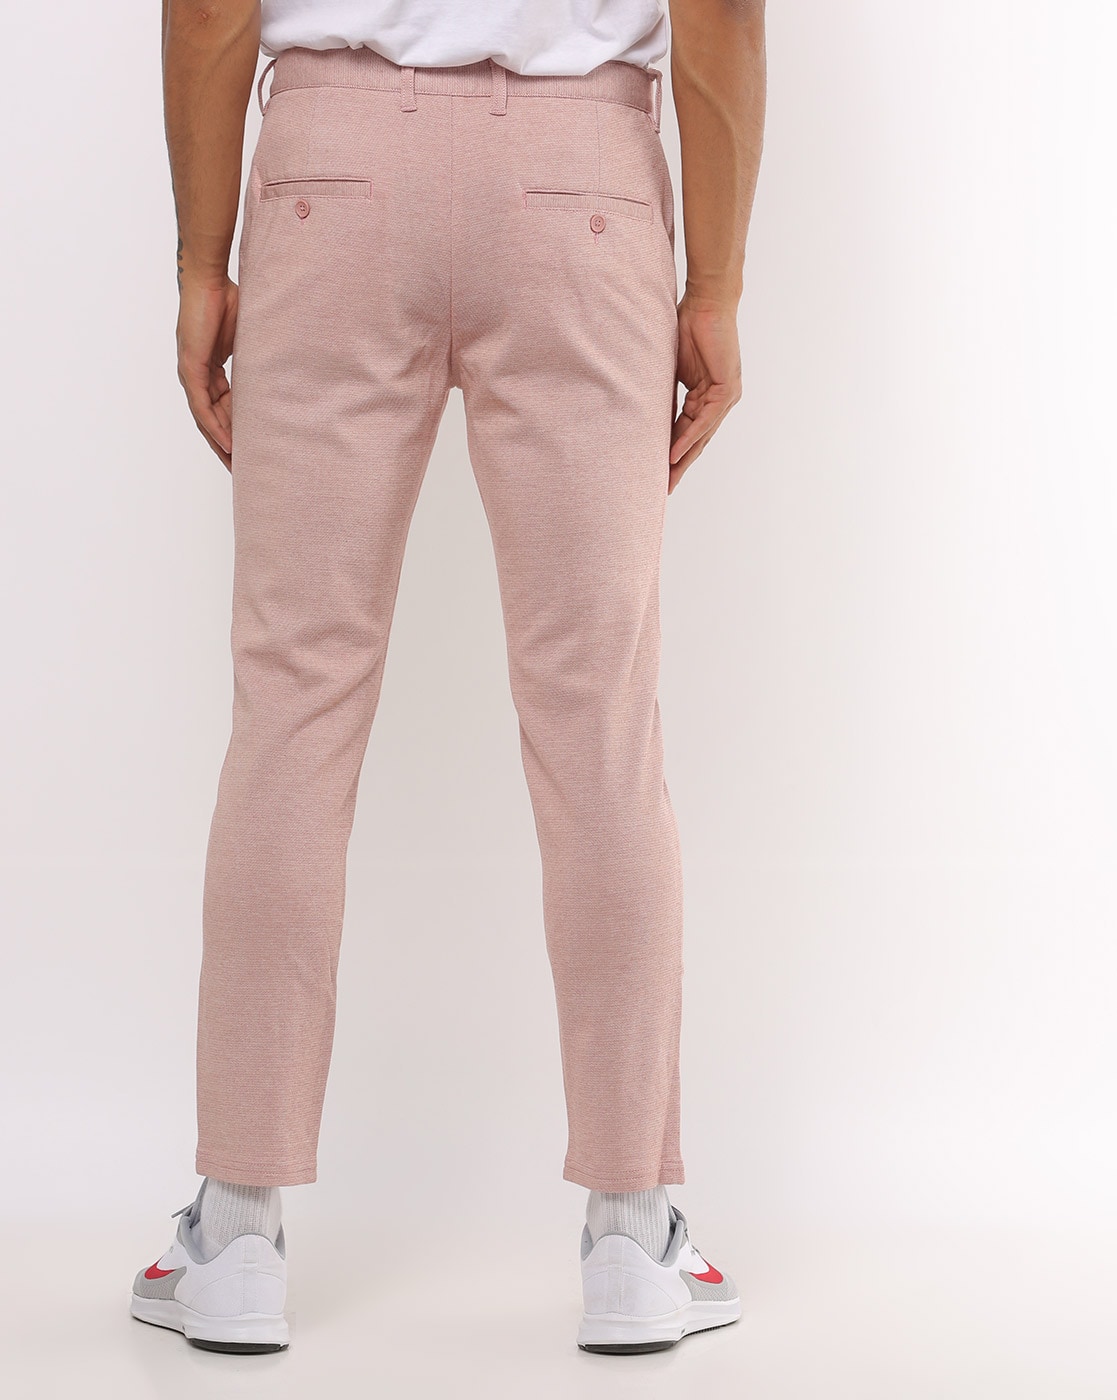 Pink Casual Trouser Mens Outfits With Light Blue Shirt Trousers  Mens  pants suit trousers